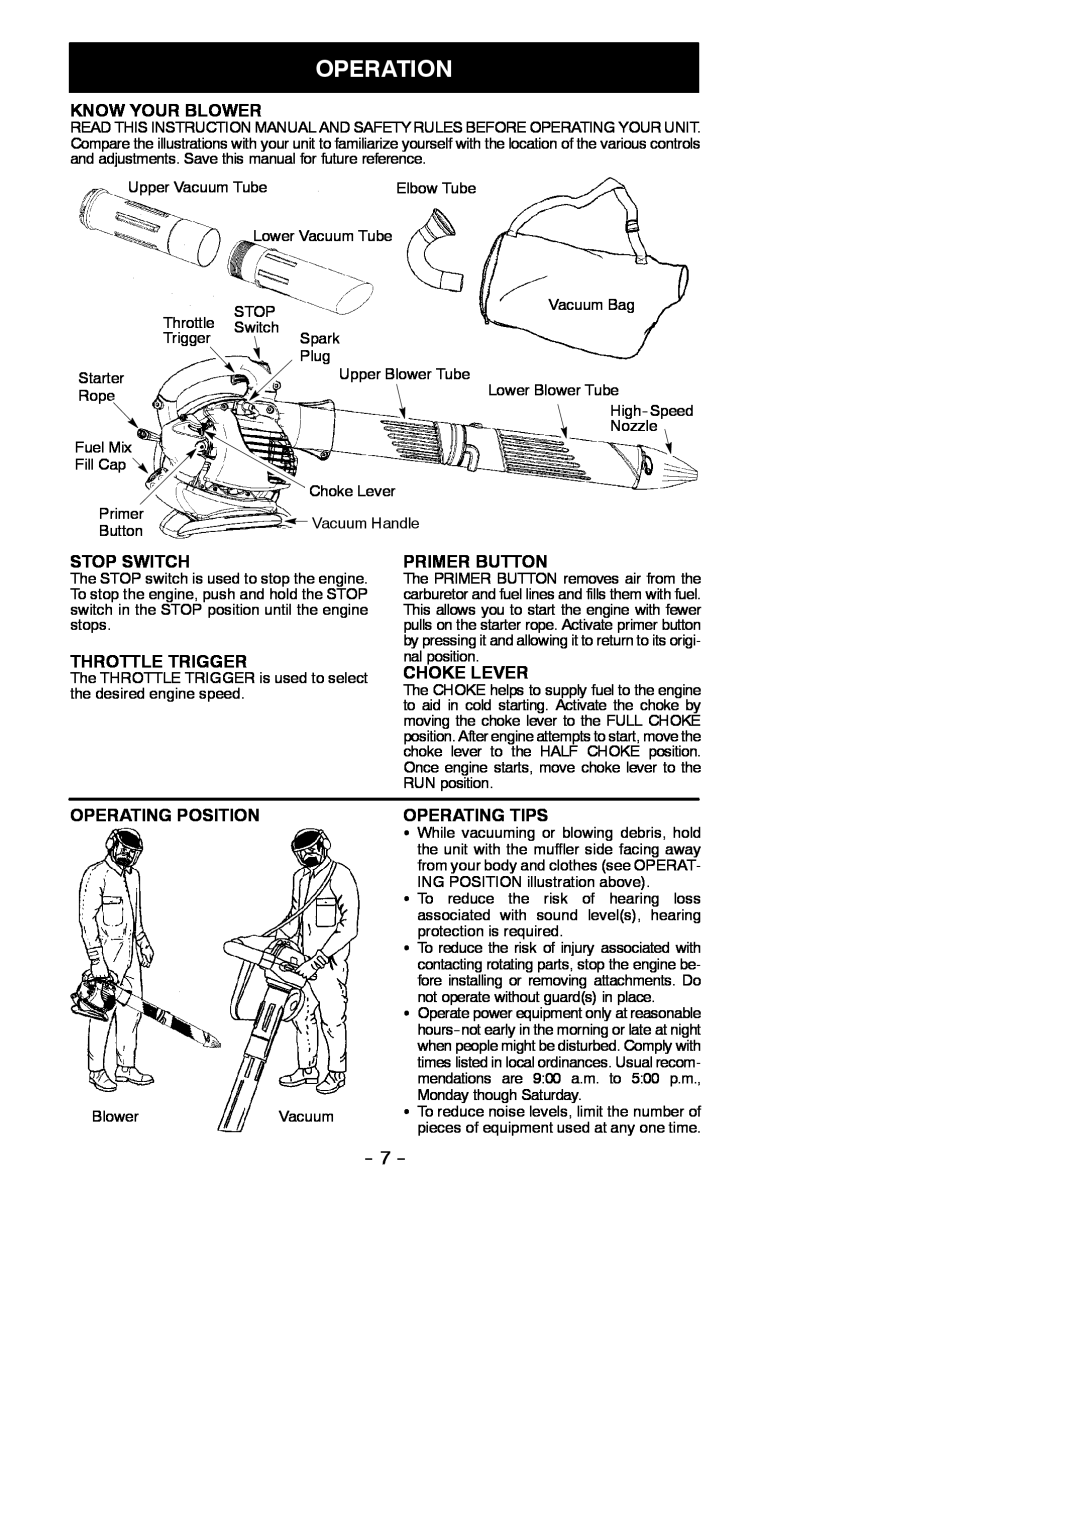 Poulan 952711923 Operation, Know Your Blower, Stop Switch, Throttle Trigger, Primer Button, Choke Lever, Operating Tips 